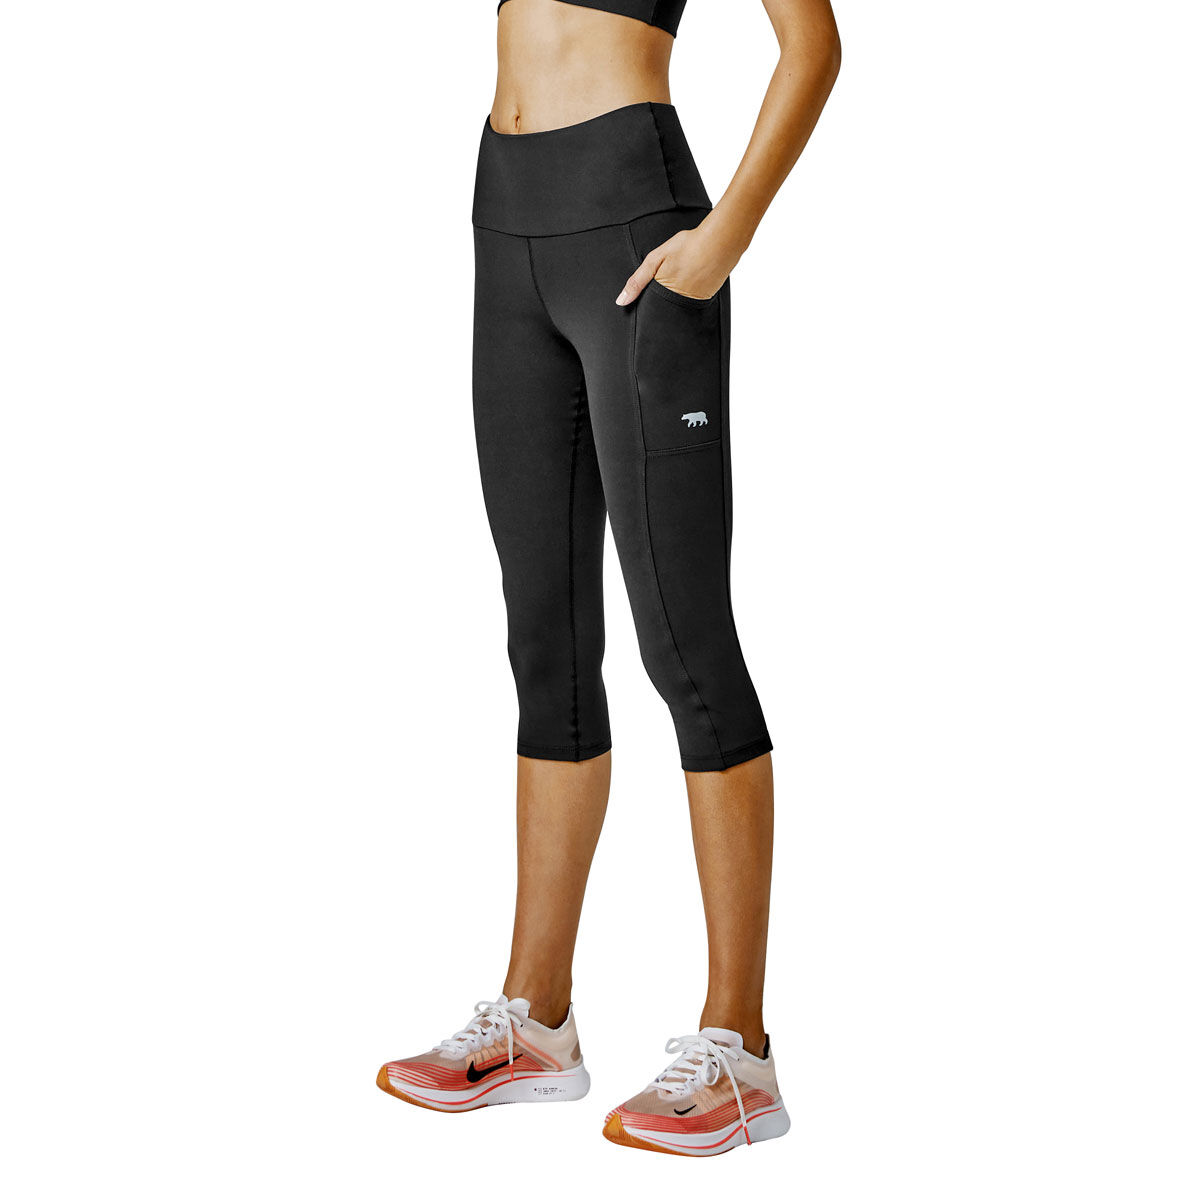 Running Bare Muse 3/4 Tights. Shop Womens Gym & Workout Leggings